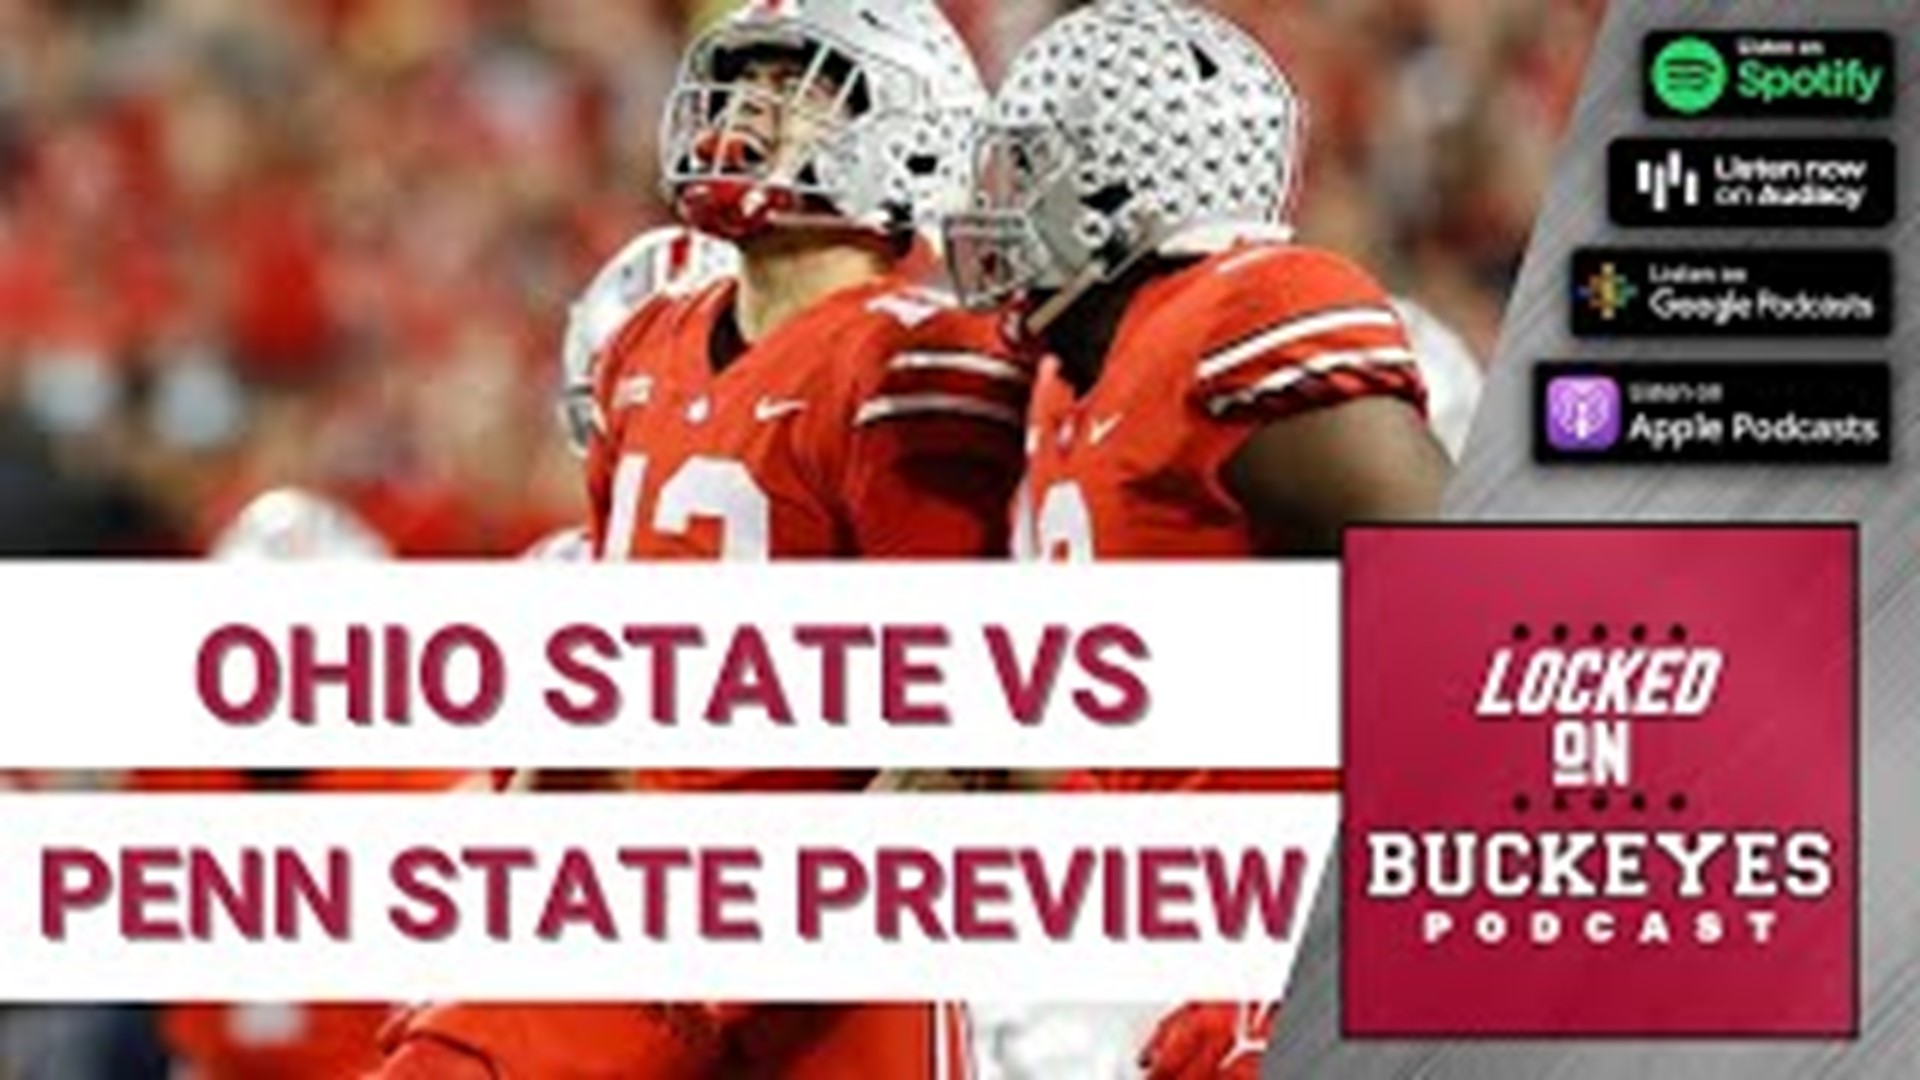 Jay Stephens and Zach Seyko preview the upcoming matchups between Ohio State and Penn State.